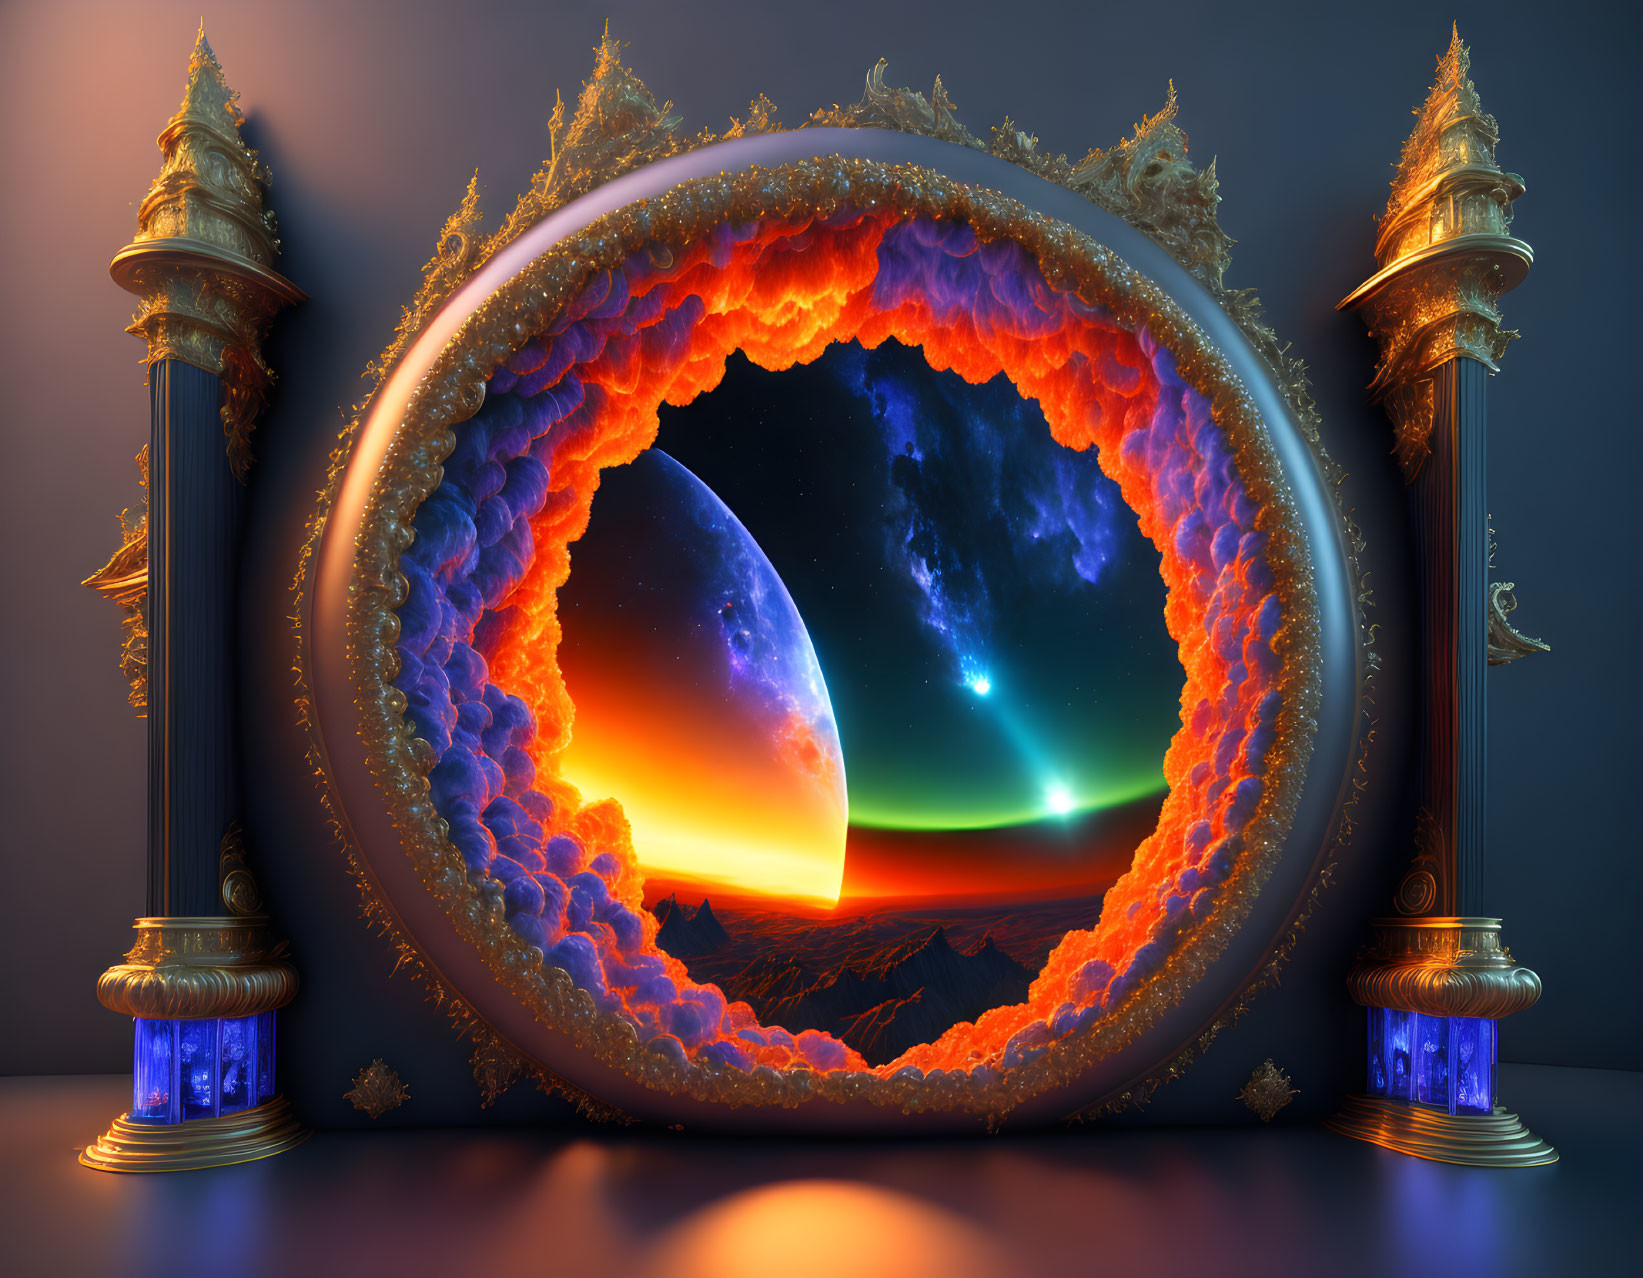 Circular Baroque Frame with Pillars Opens to Cosmic Scene